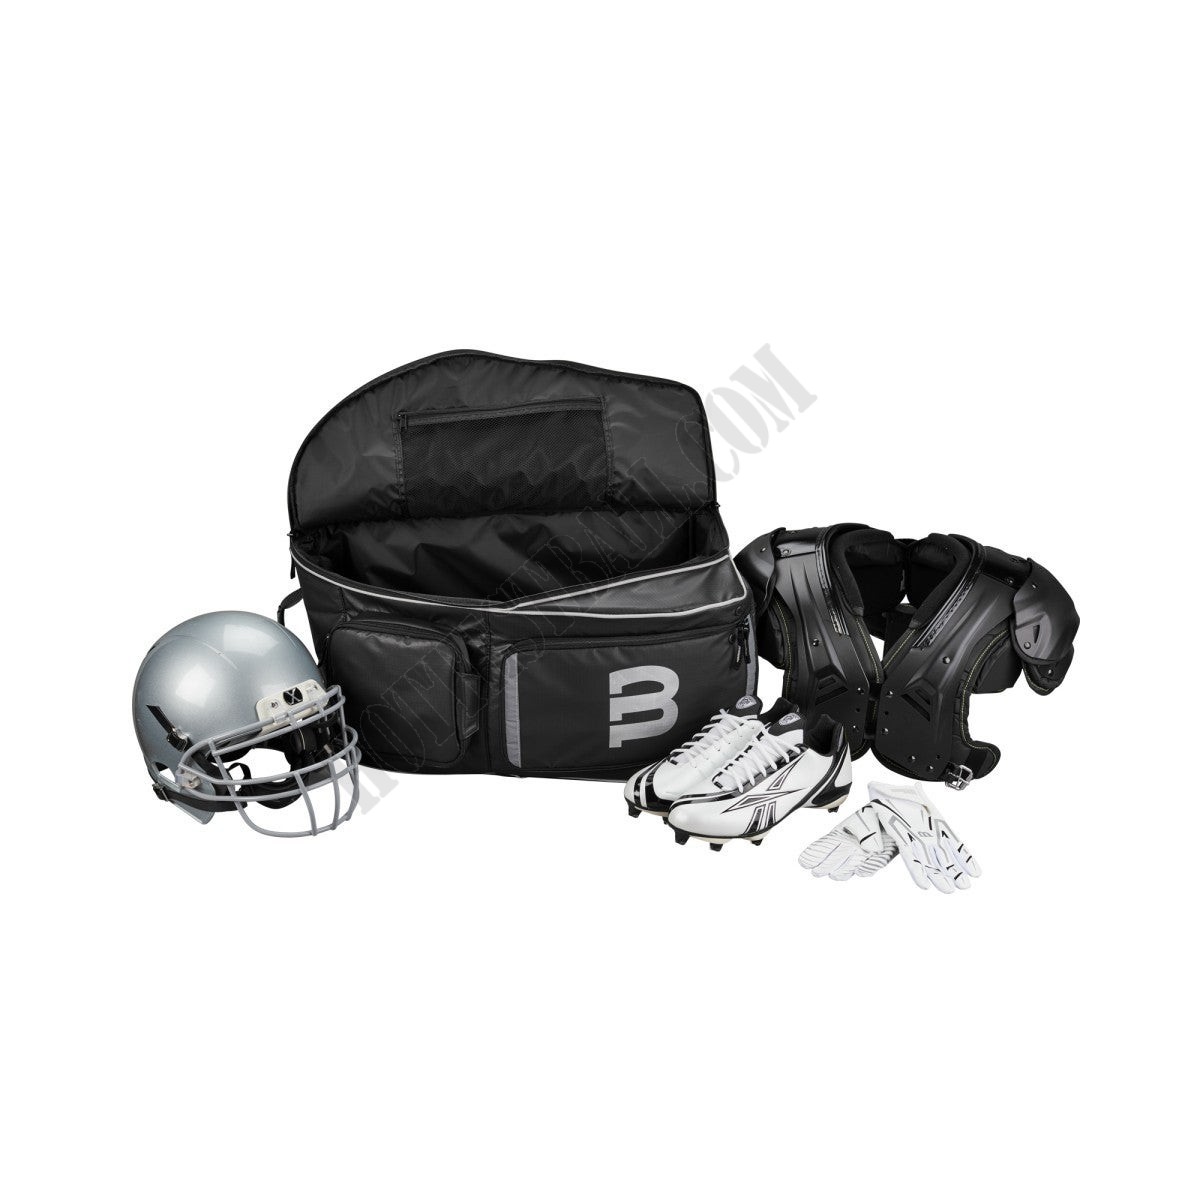 Tackle Football Player Equipment Bag - Wilson Discount Store - -5